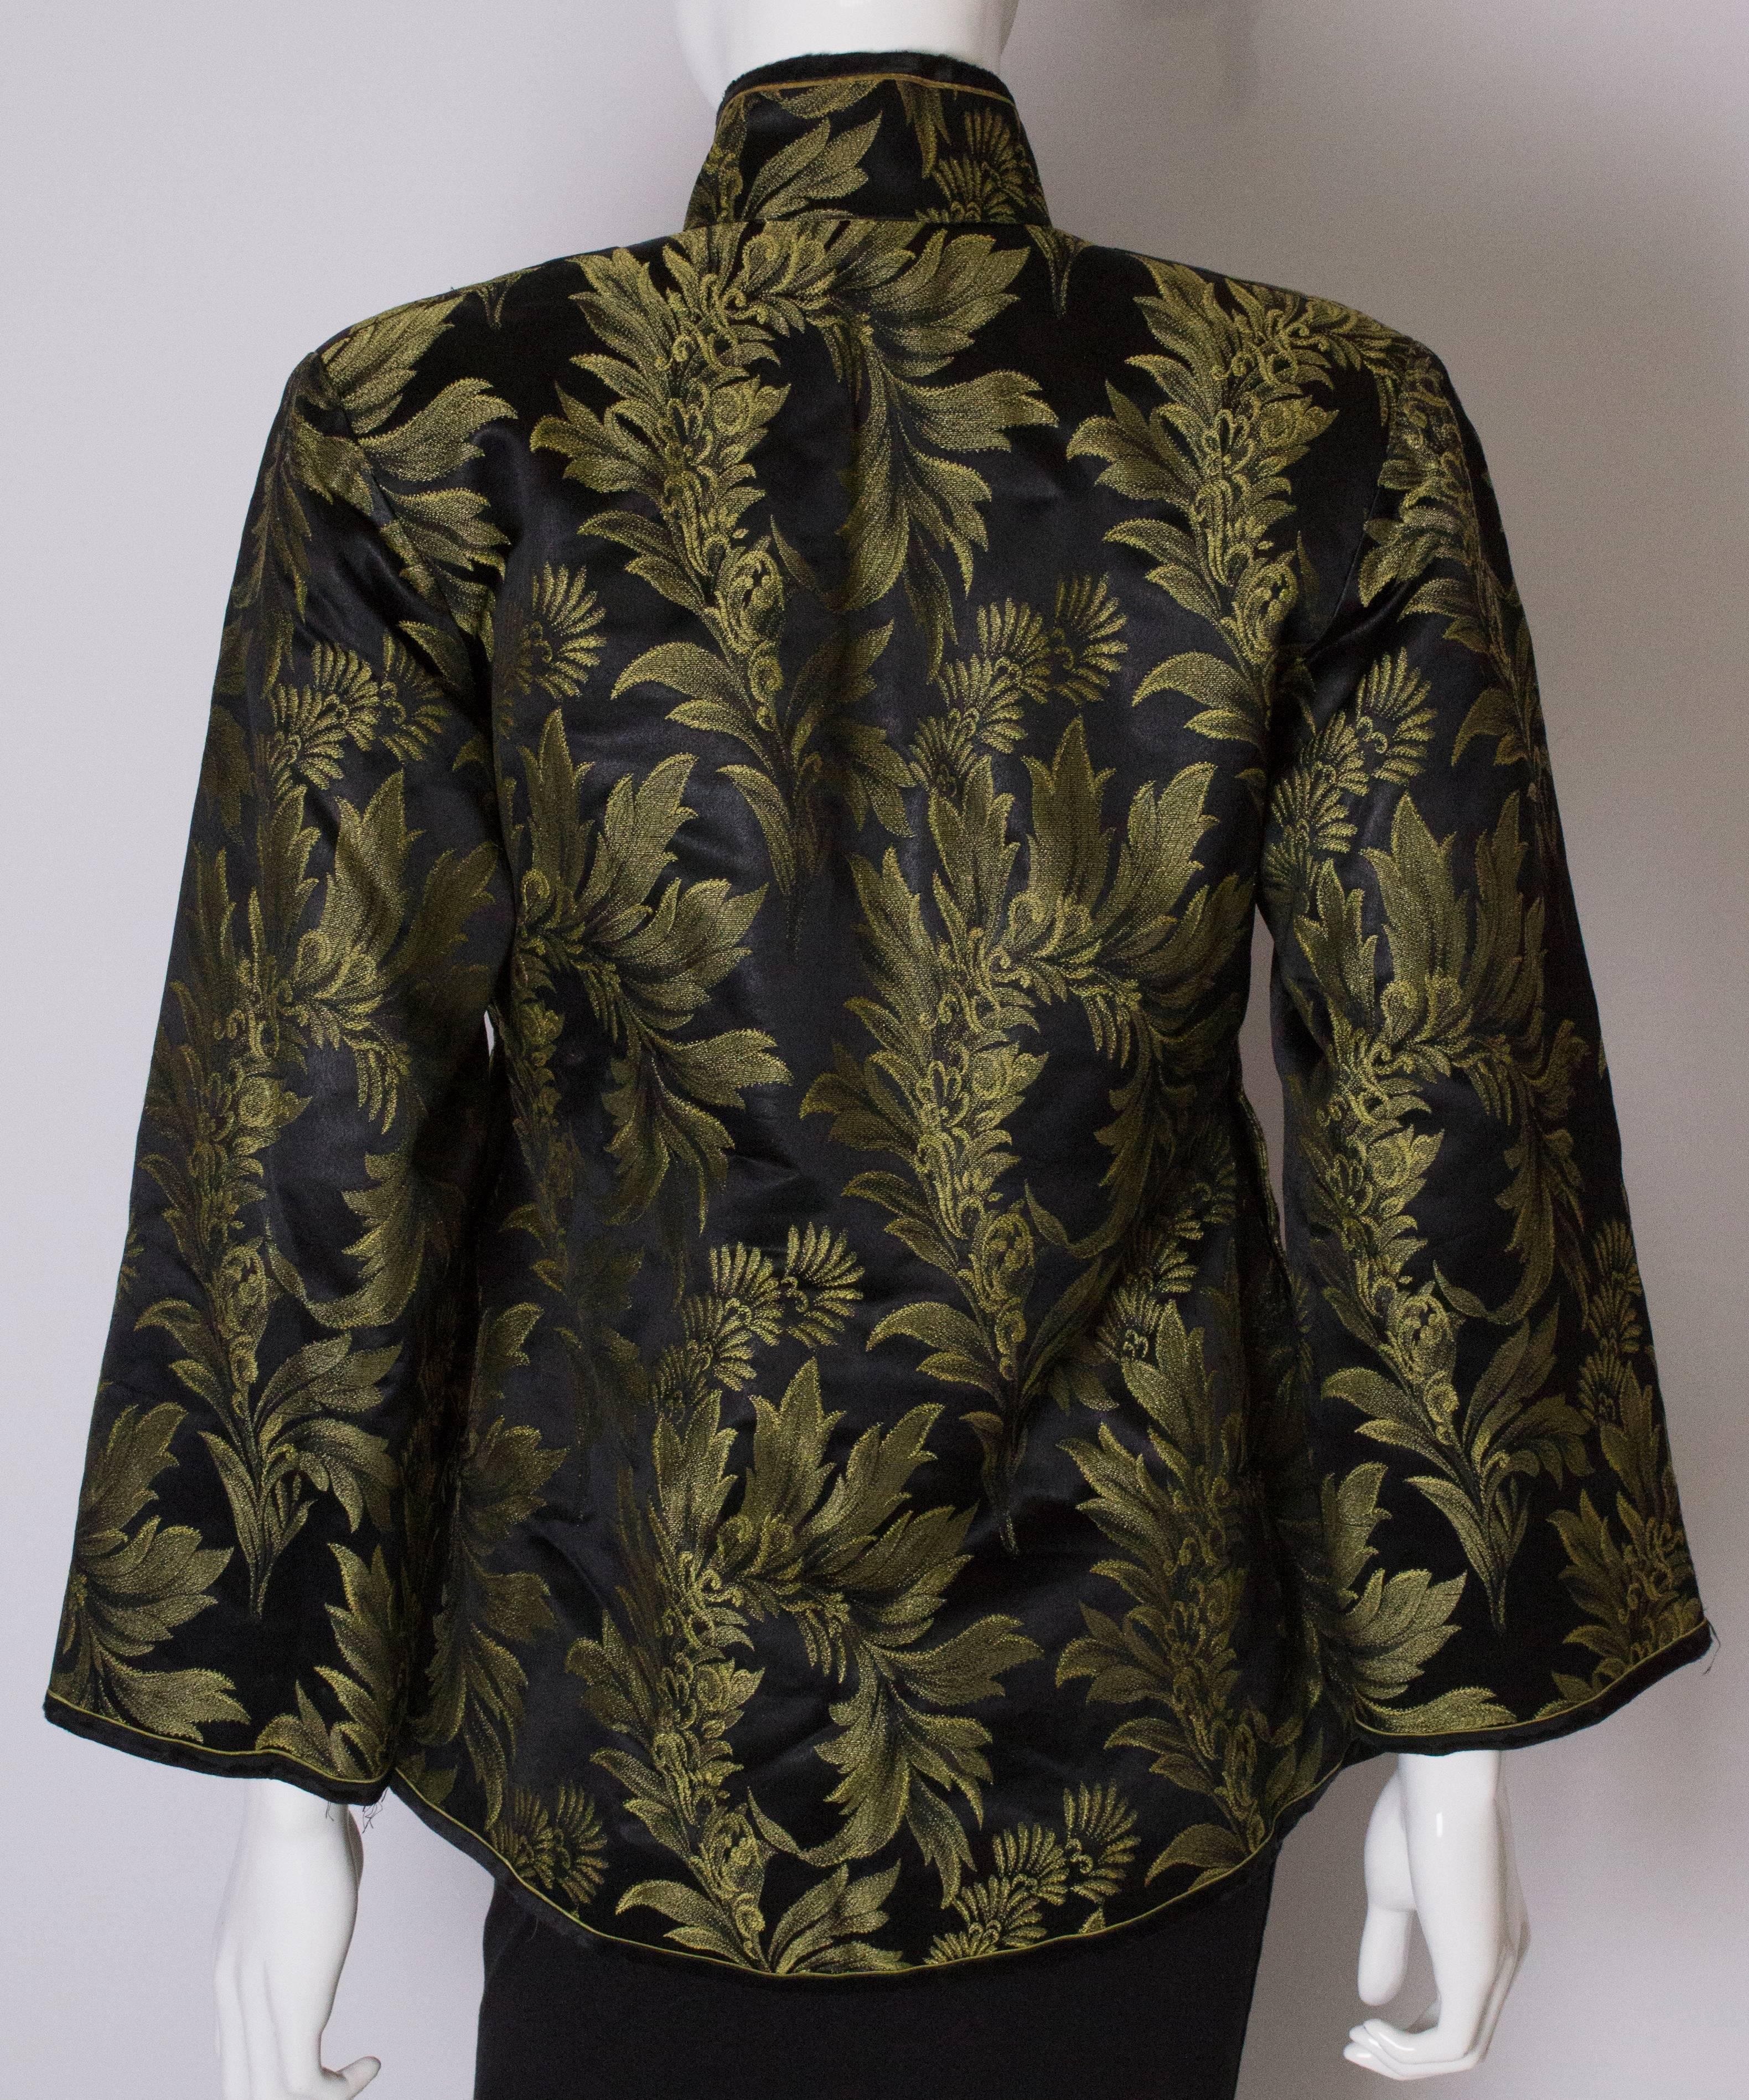 Women's A Vintage 1980s Embroidered Chinese Jacket with Fur Lining. For Sale